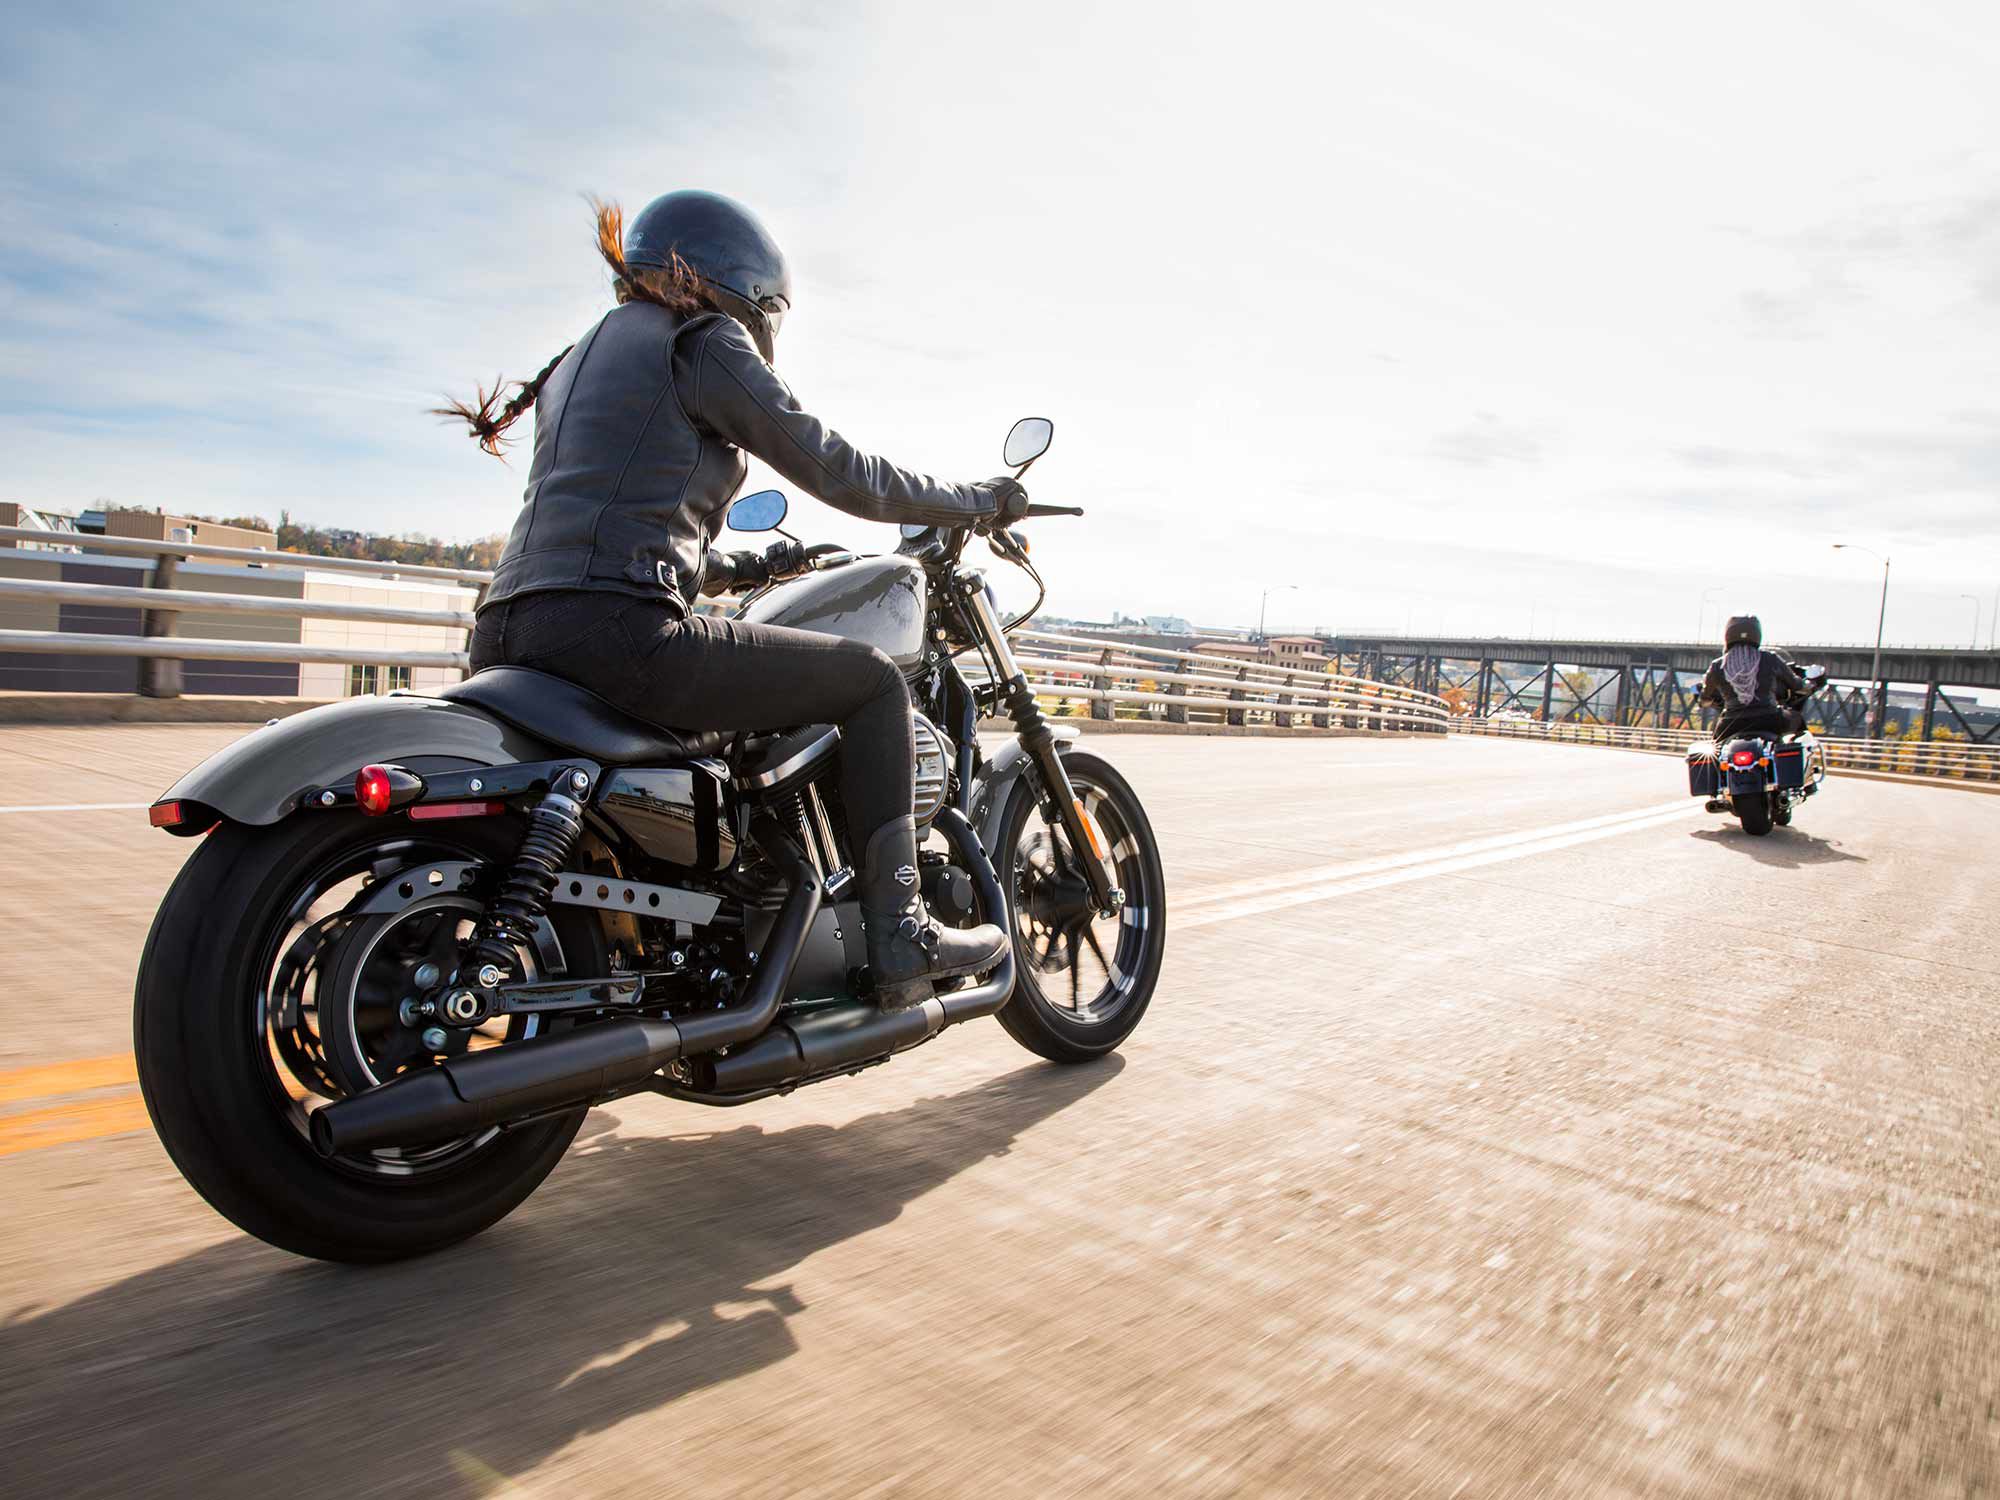 Grab your favorite leather jacket and riding boots. The Iron 883 has the classic cruiser charm with a dollop of V-twin power.